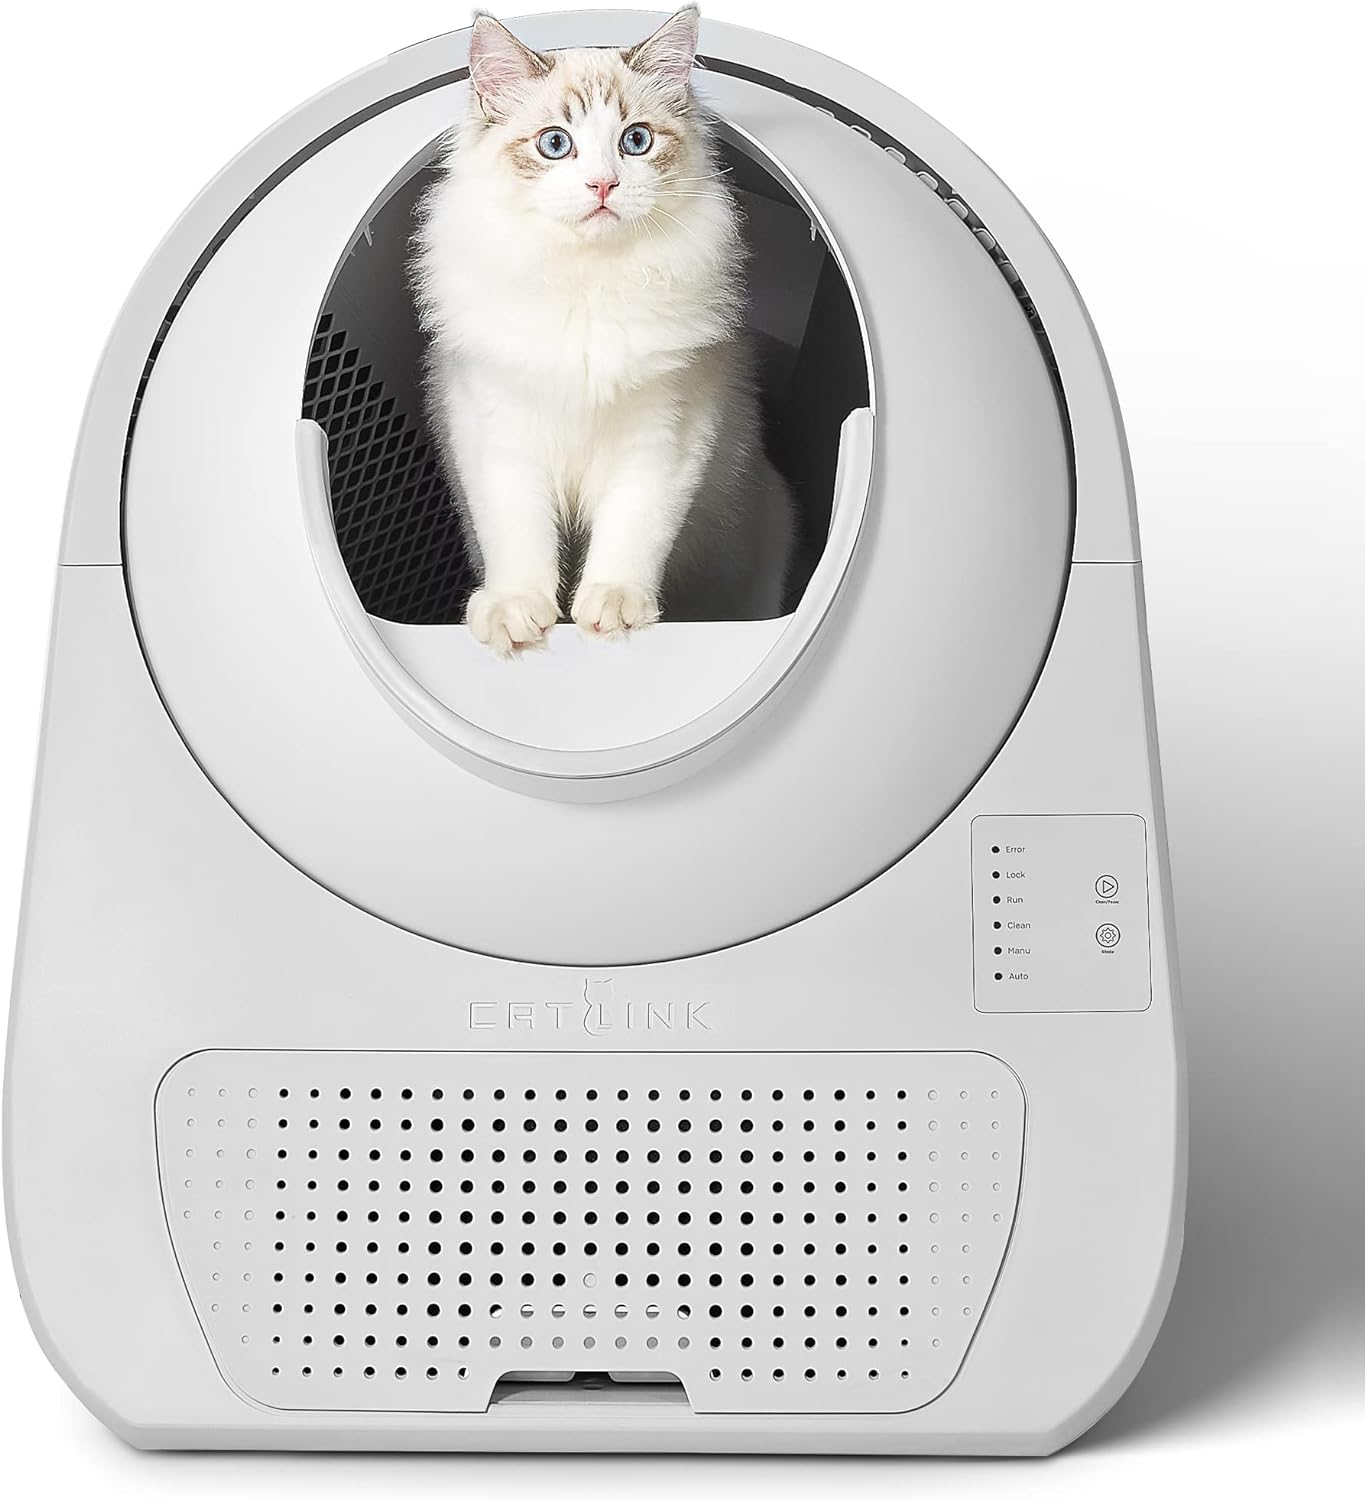 CATLINK Automatic Self-Cleaning Cat Litter Box